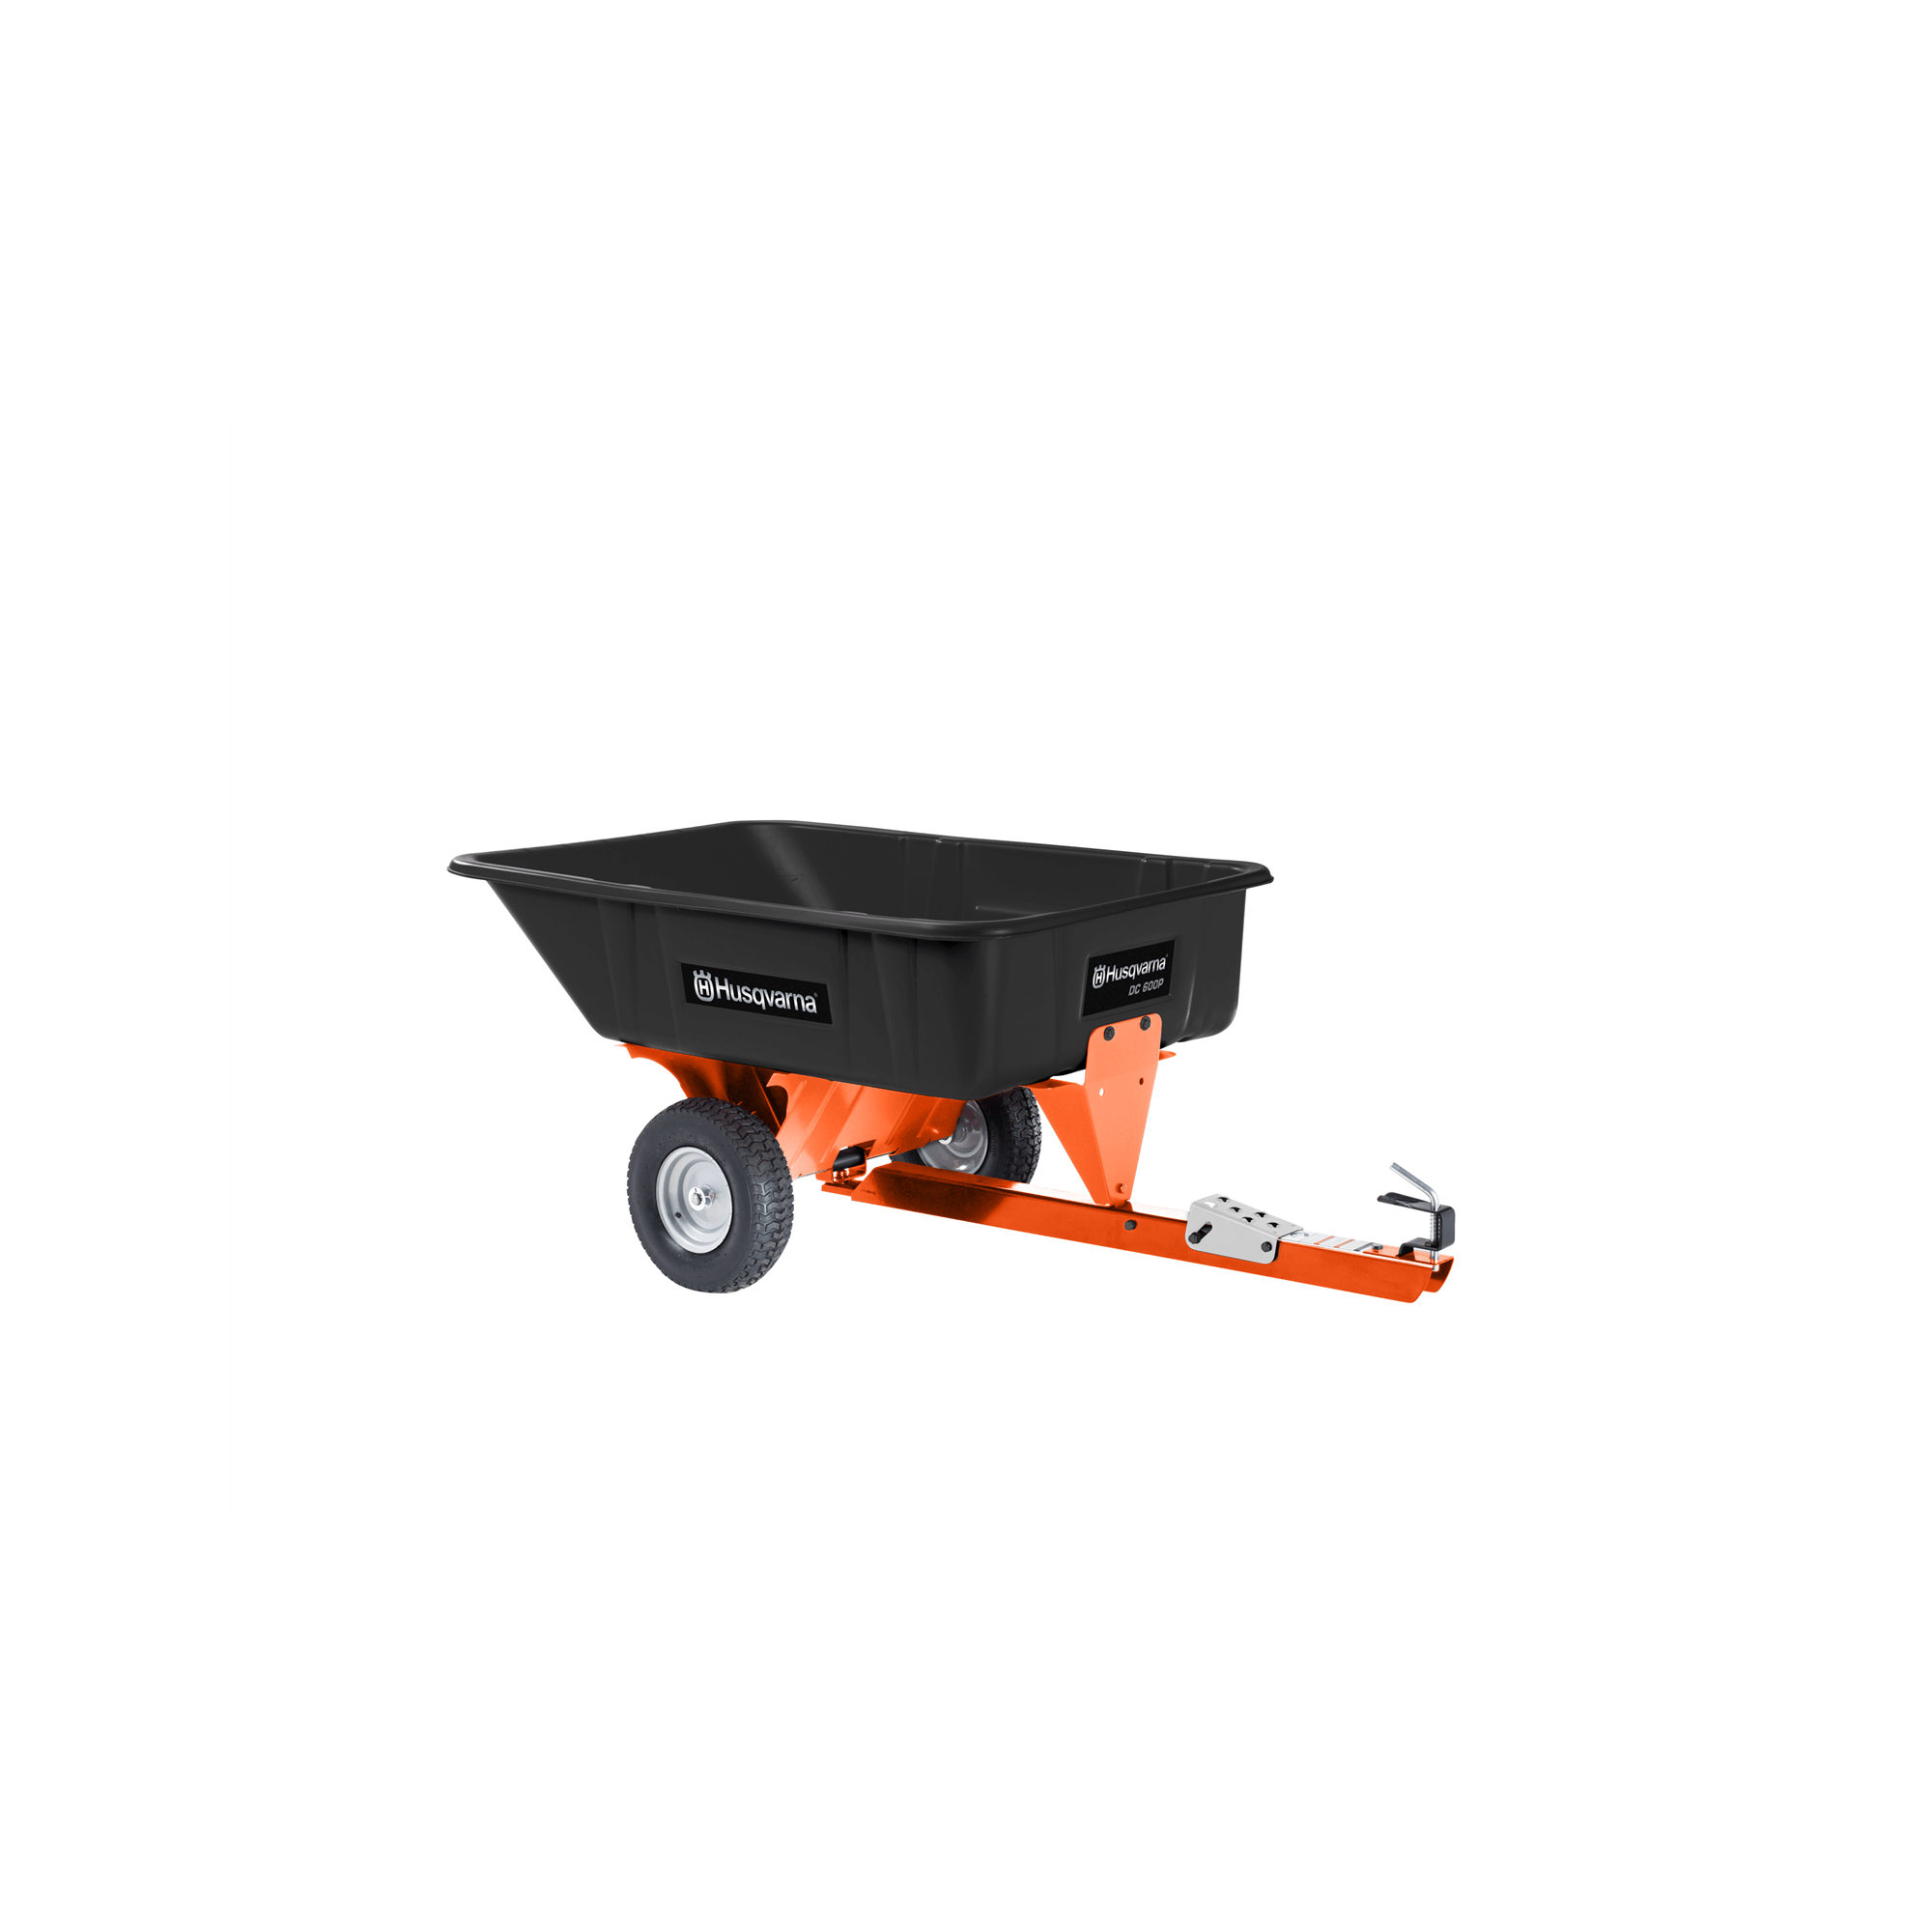 Image for 10 Cu. Ft. Poly Swivel Dump Cart from HusqvarnaB2C